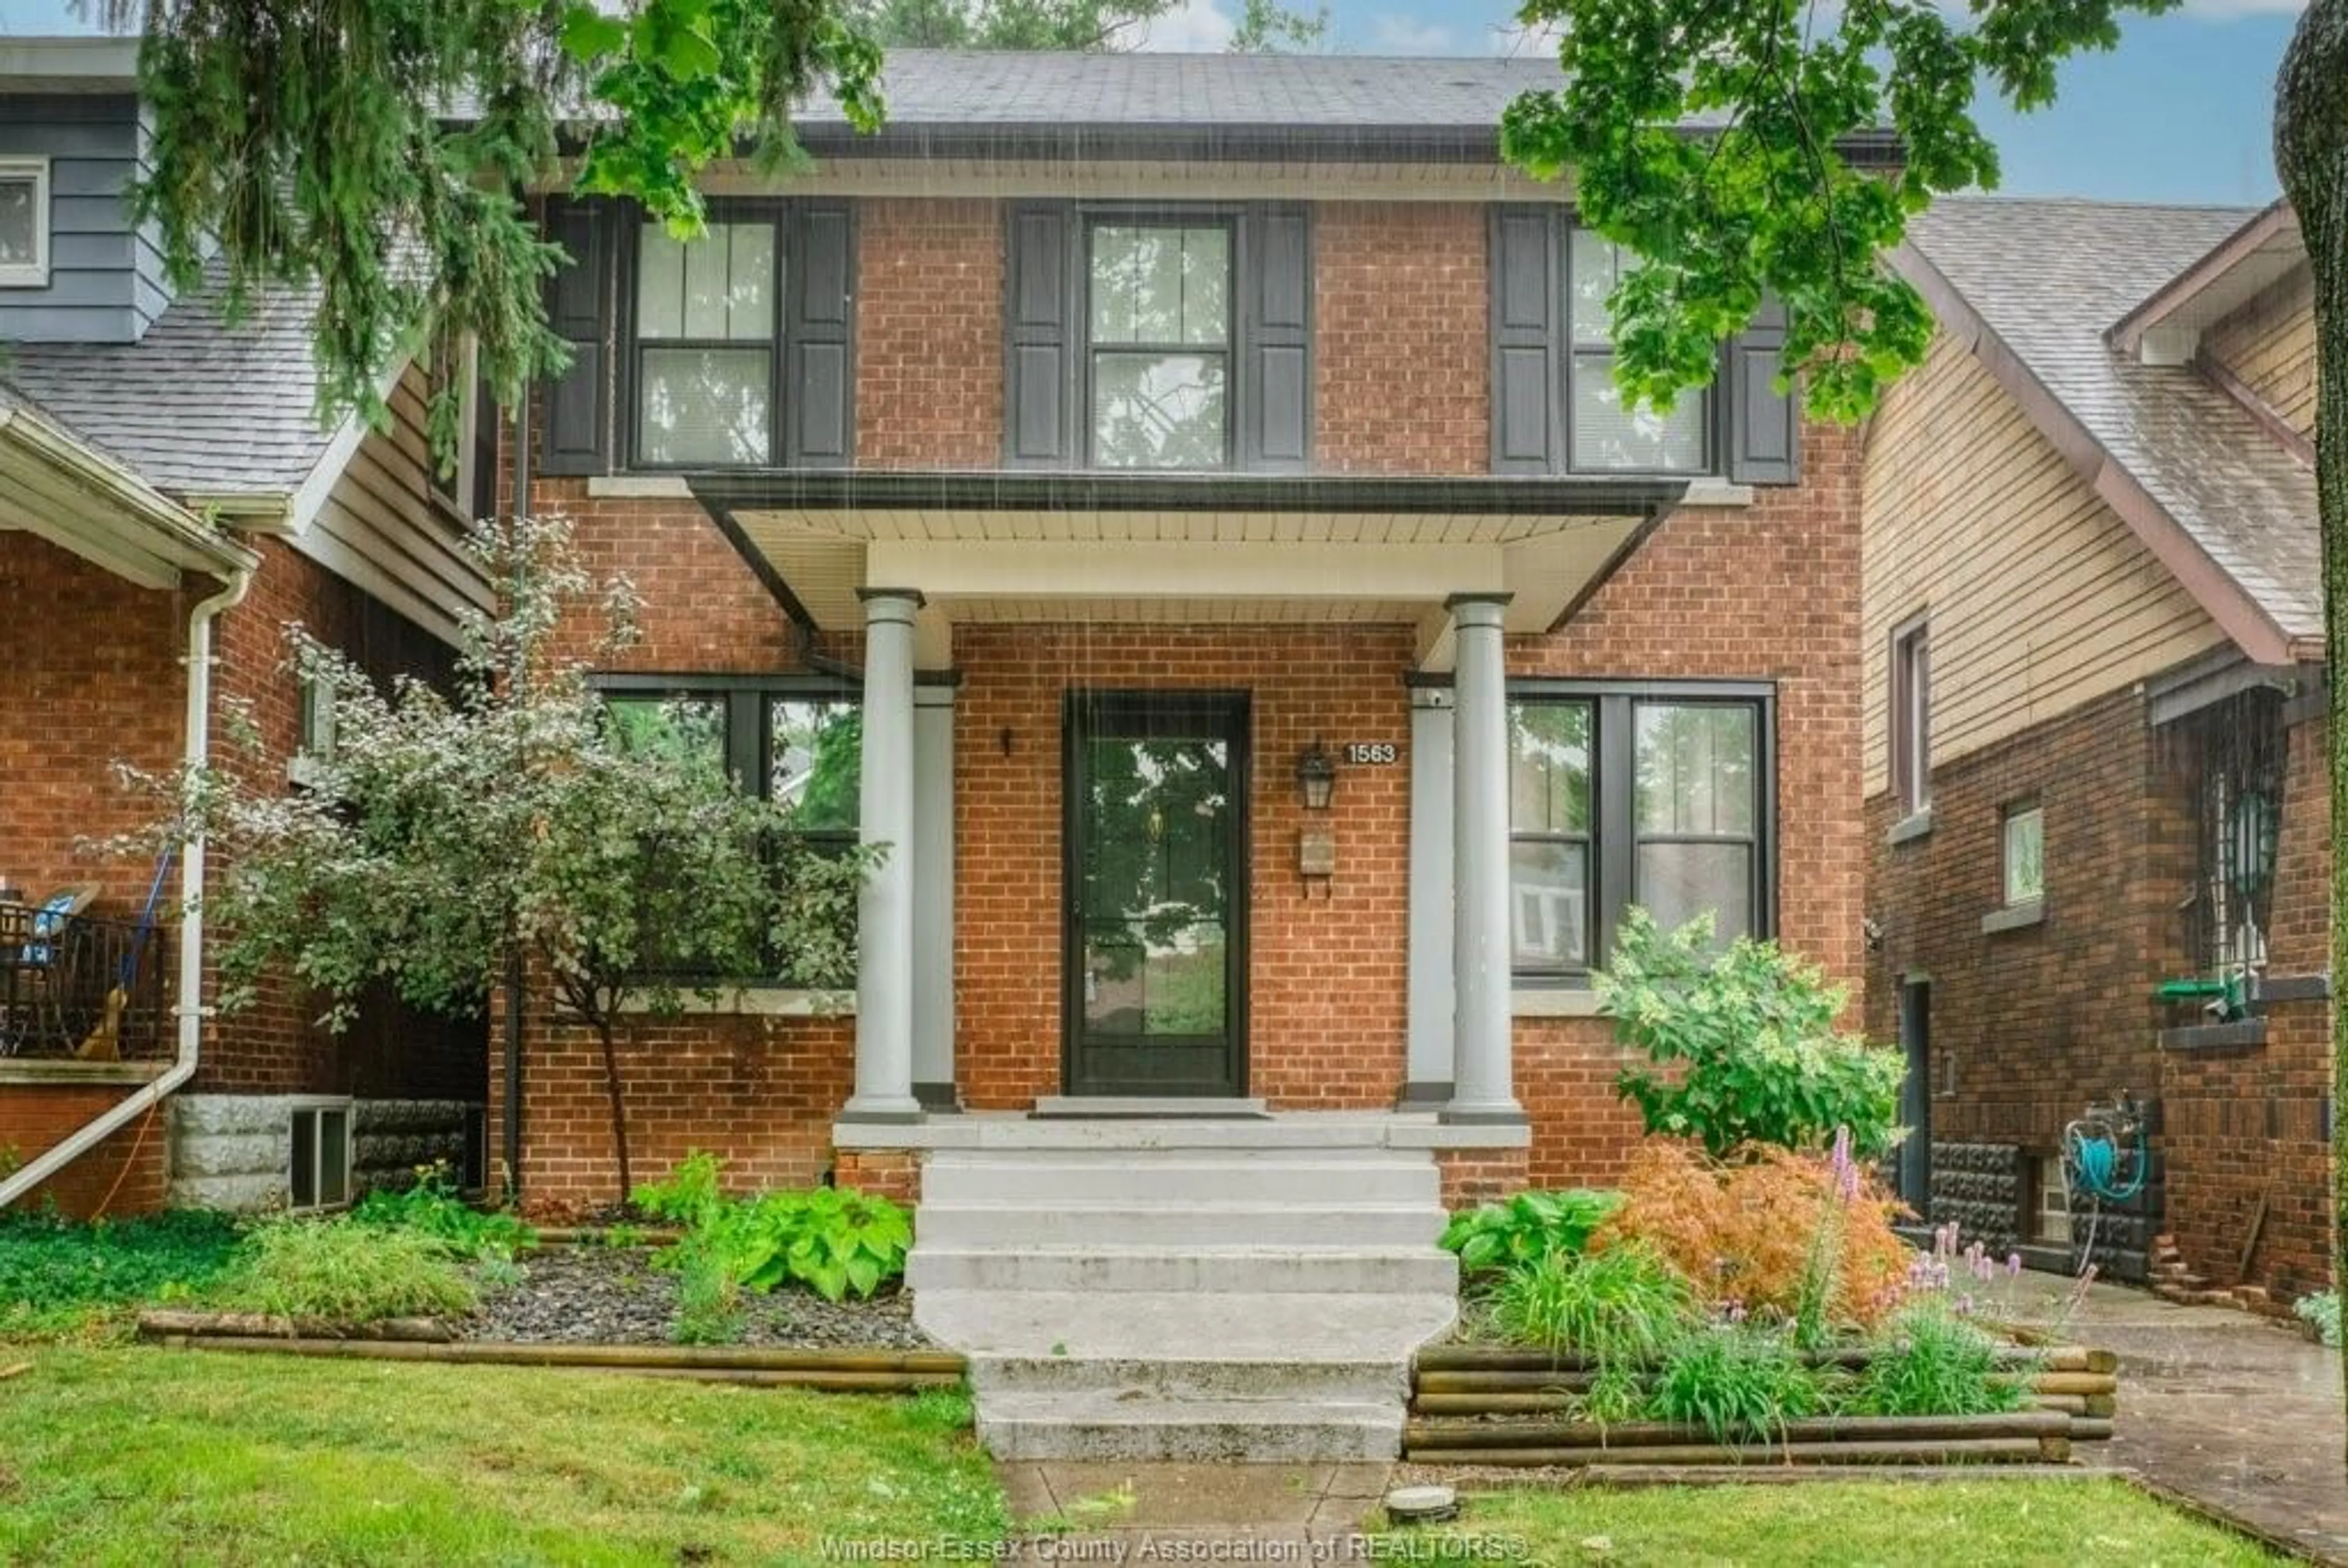 Home with brick exterior material for 1563 Victoria Ave, Windsor Ontario N8X 1P4